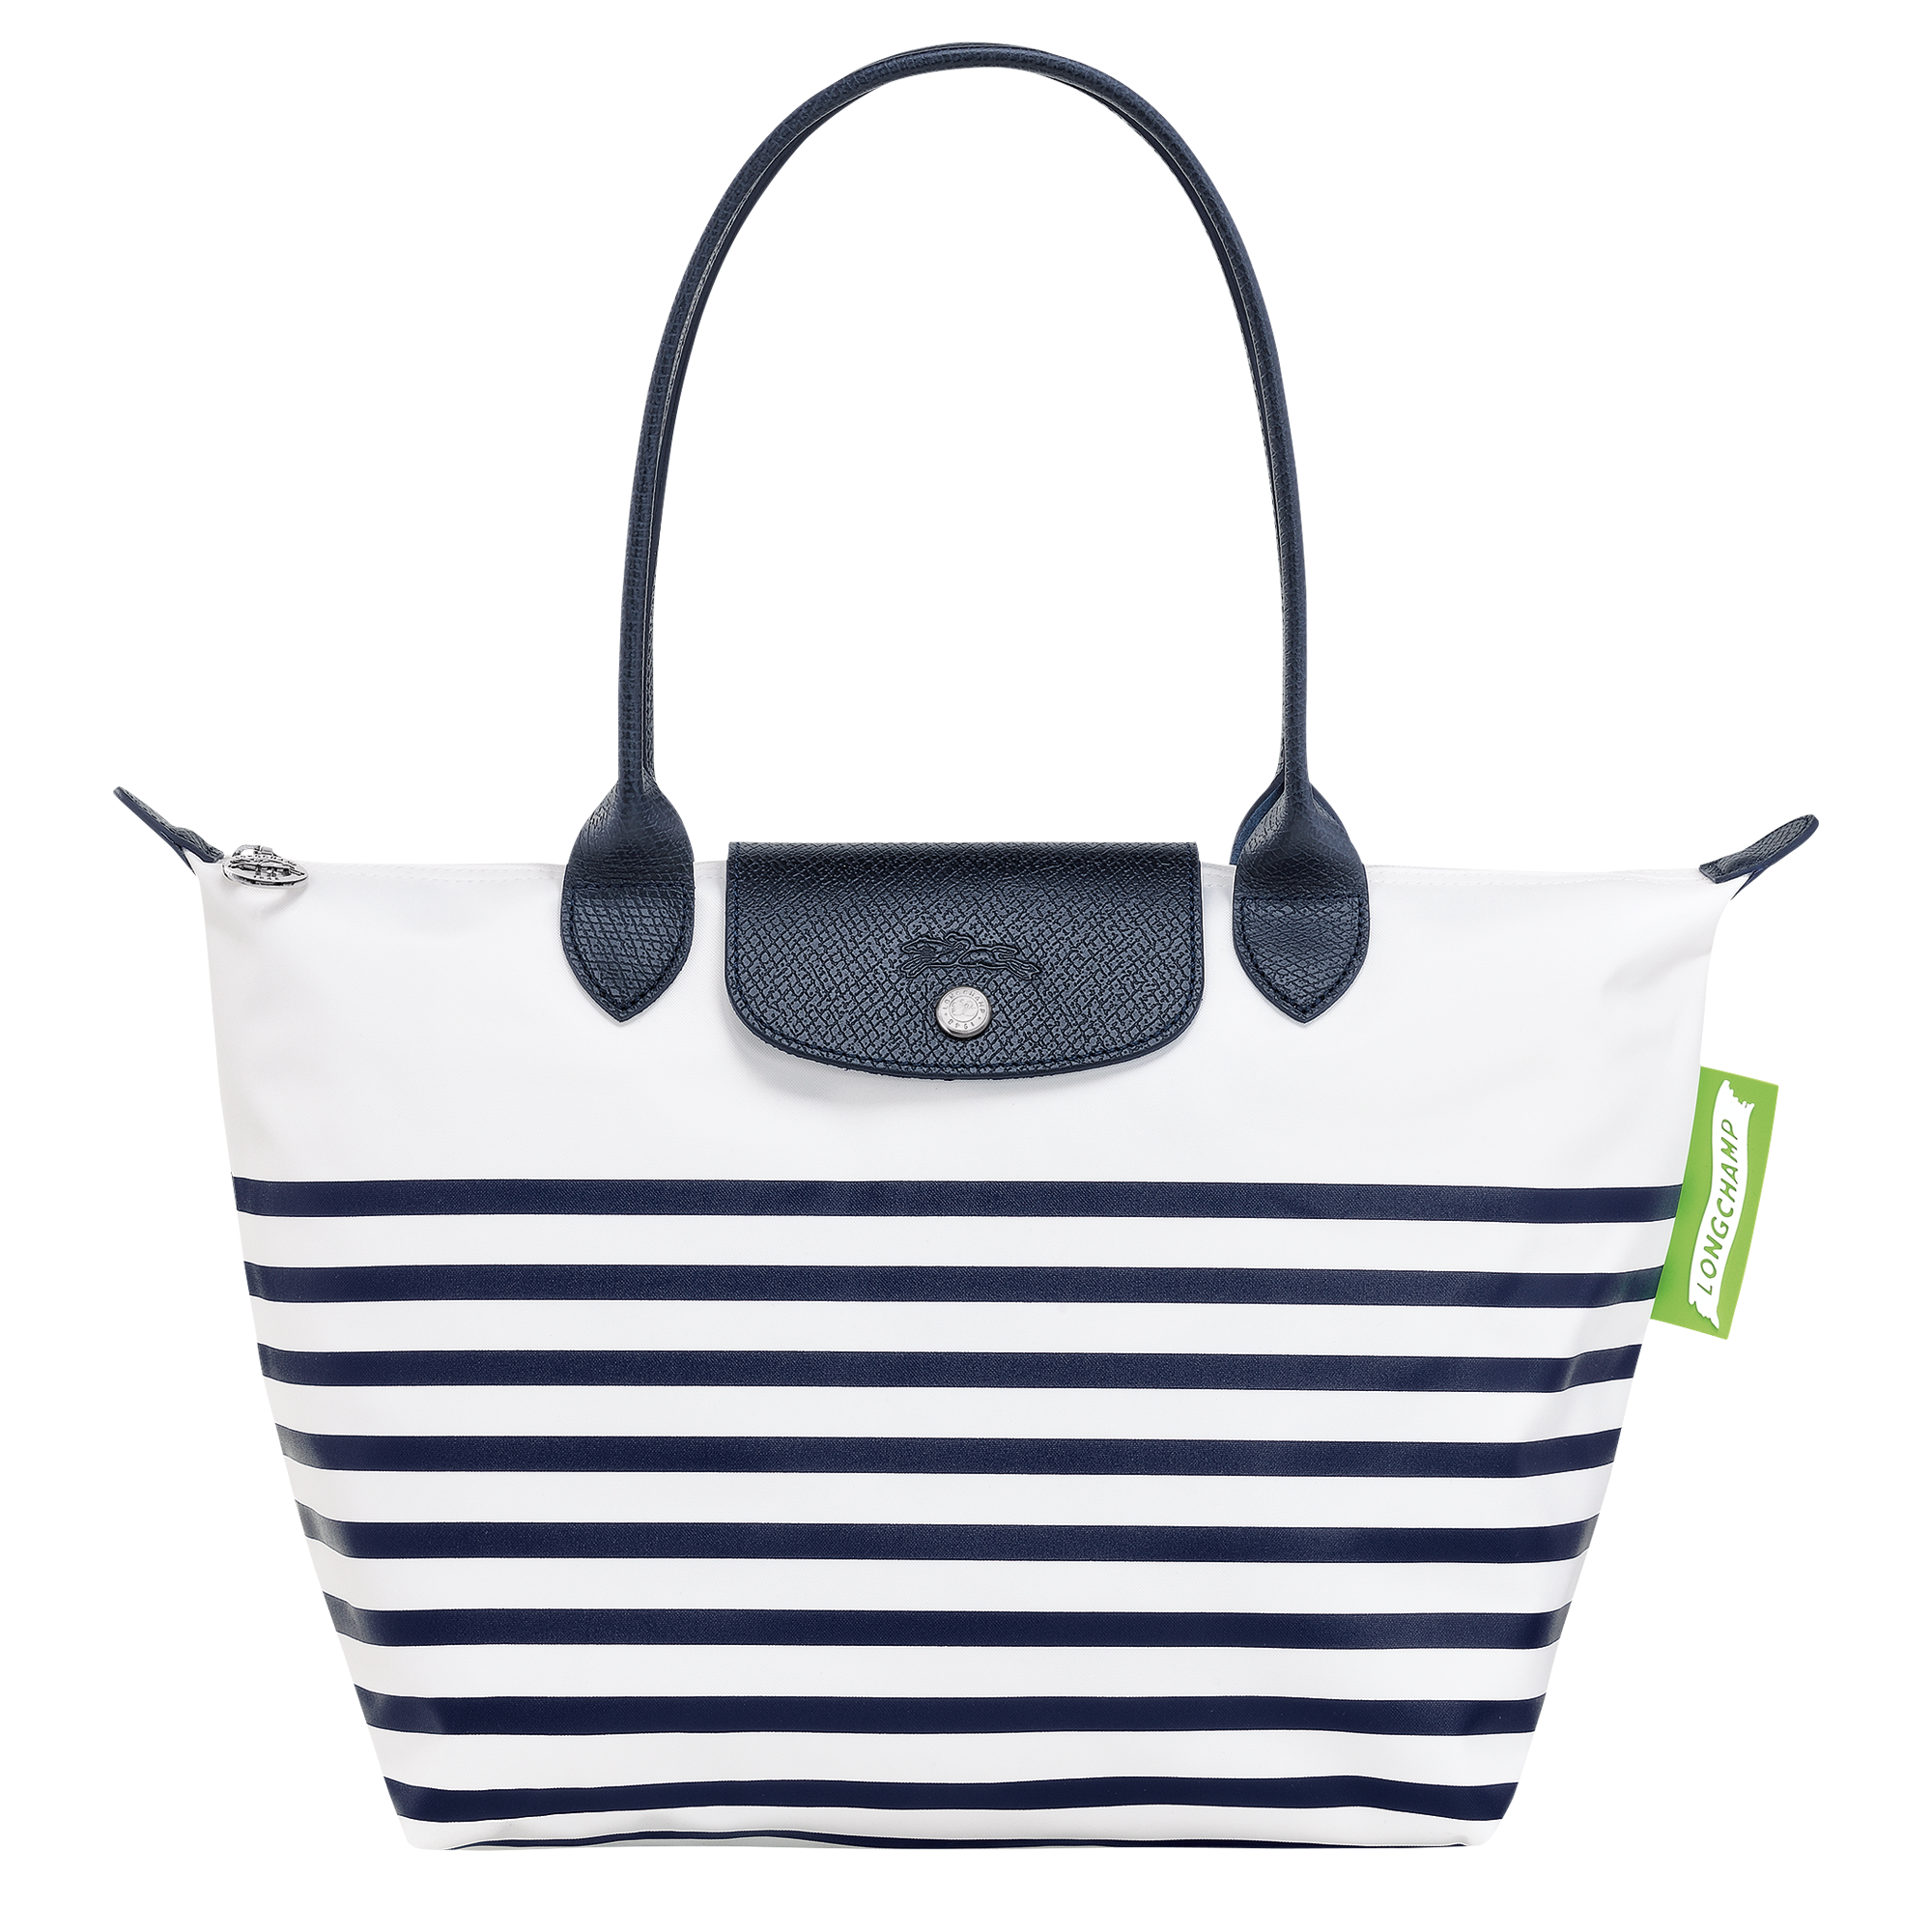 Longchamp LE PLIAGE COLLECTION - Tote bag M in Navy/White - 1 (SKU: L2605HDF165)